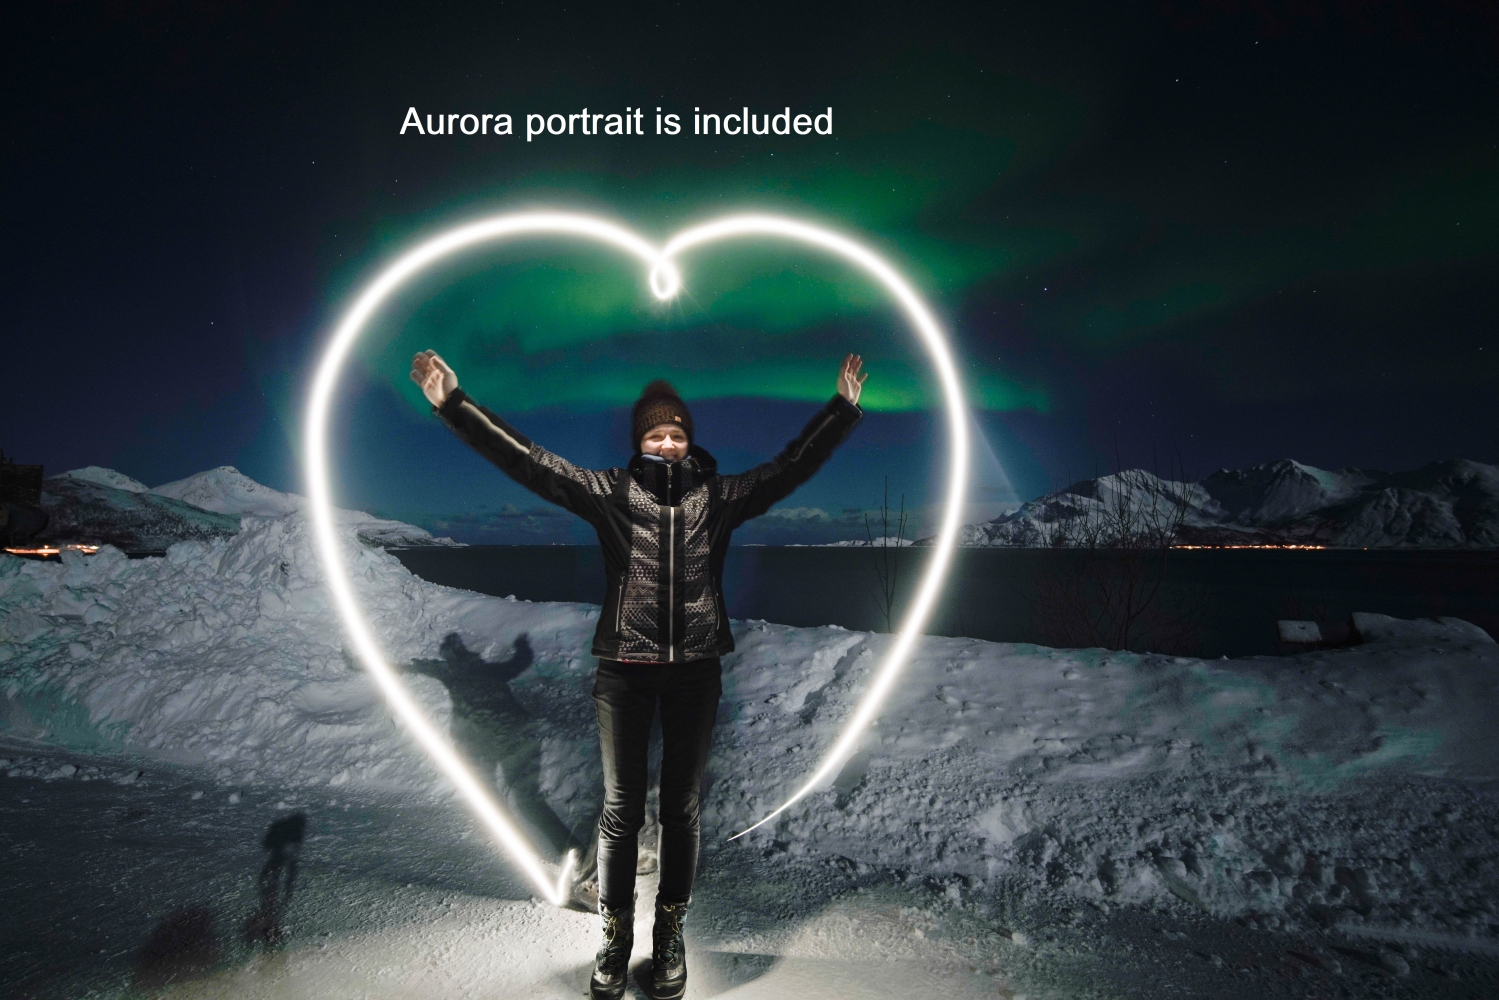 Aurora - Teaming up with nature